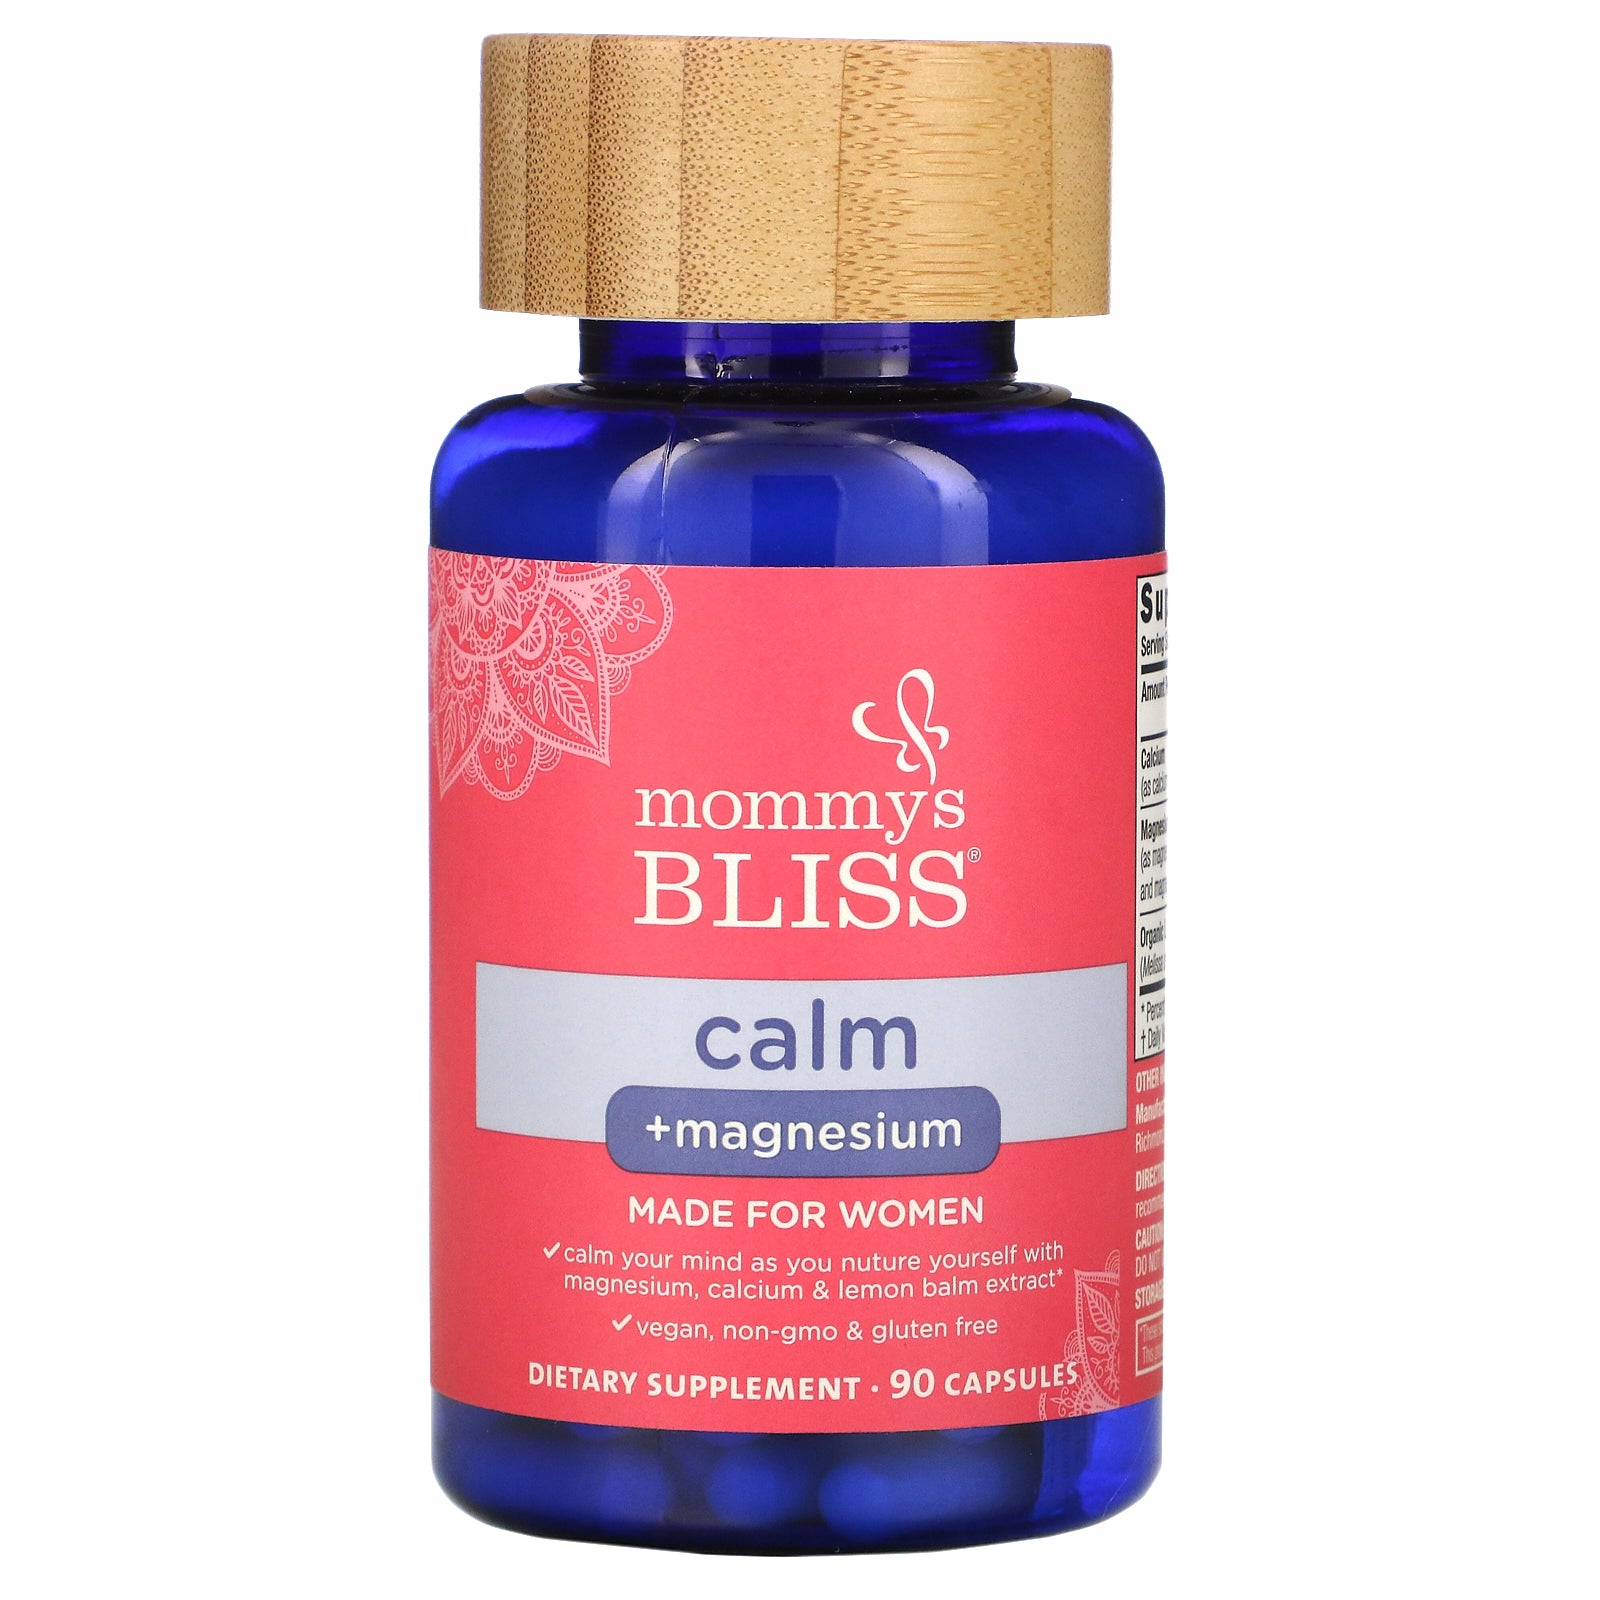 Mommy's Bliss, Calm + Magnesium, For Women, 90 Capsules